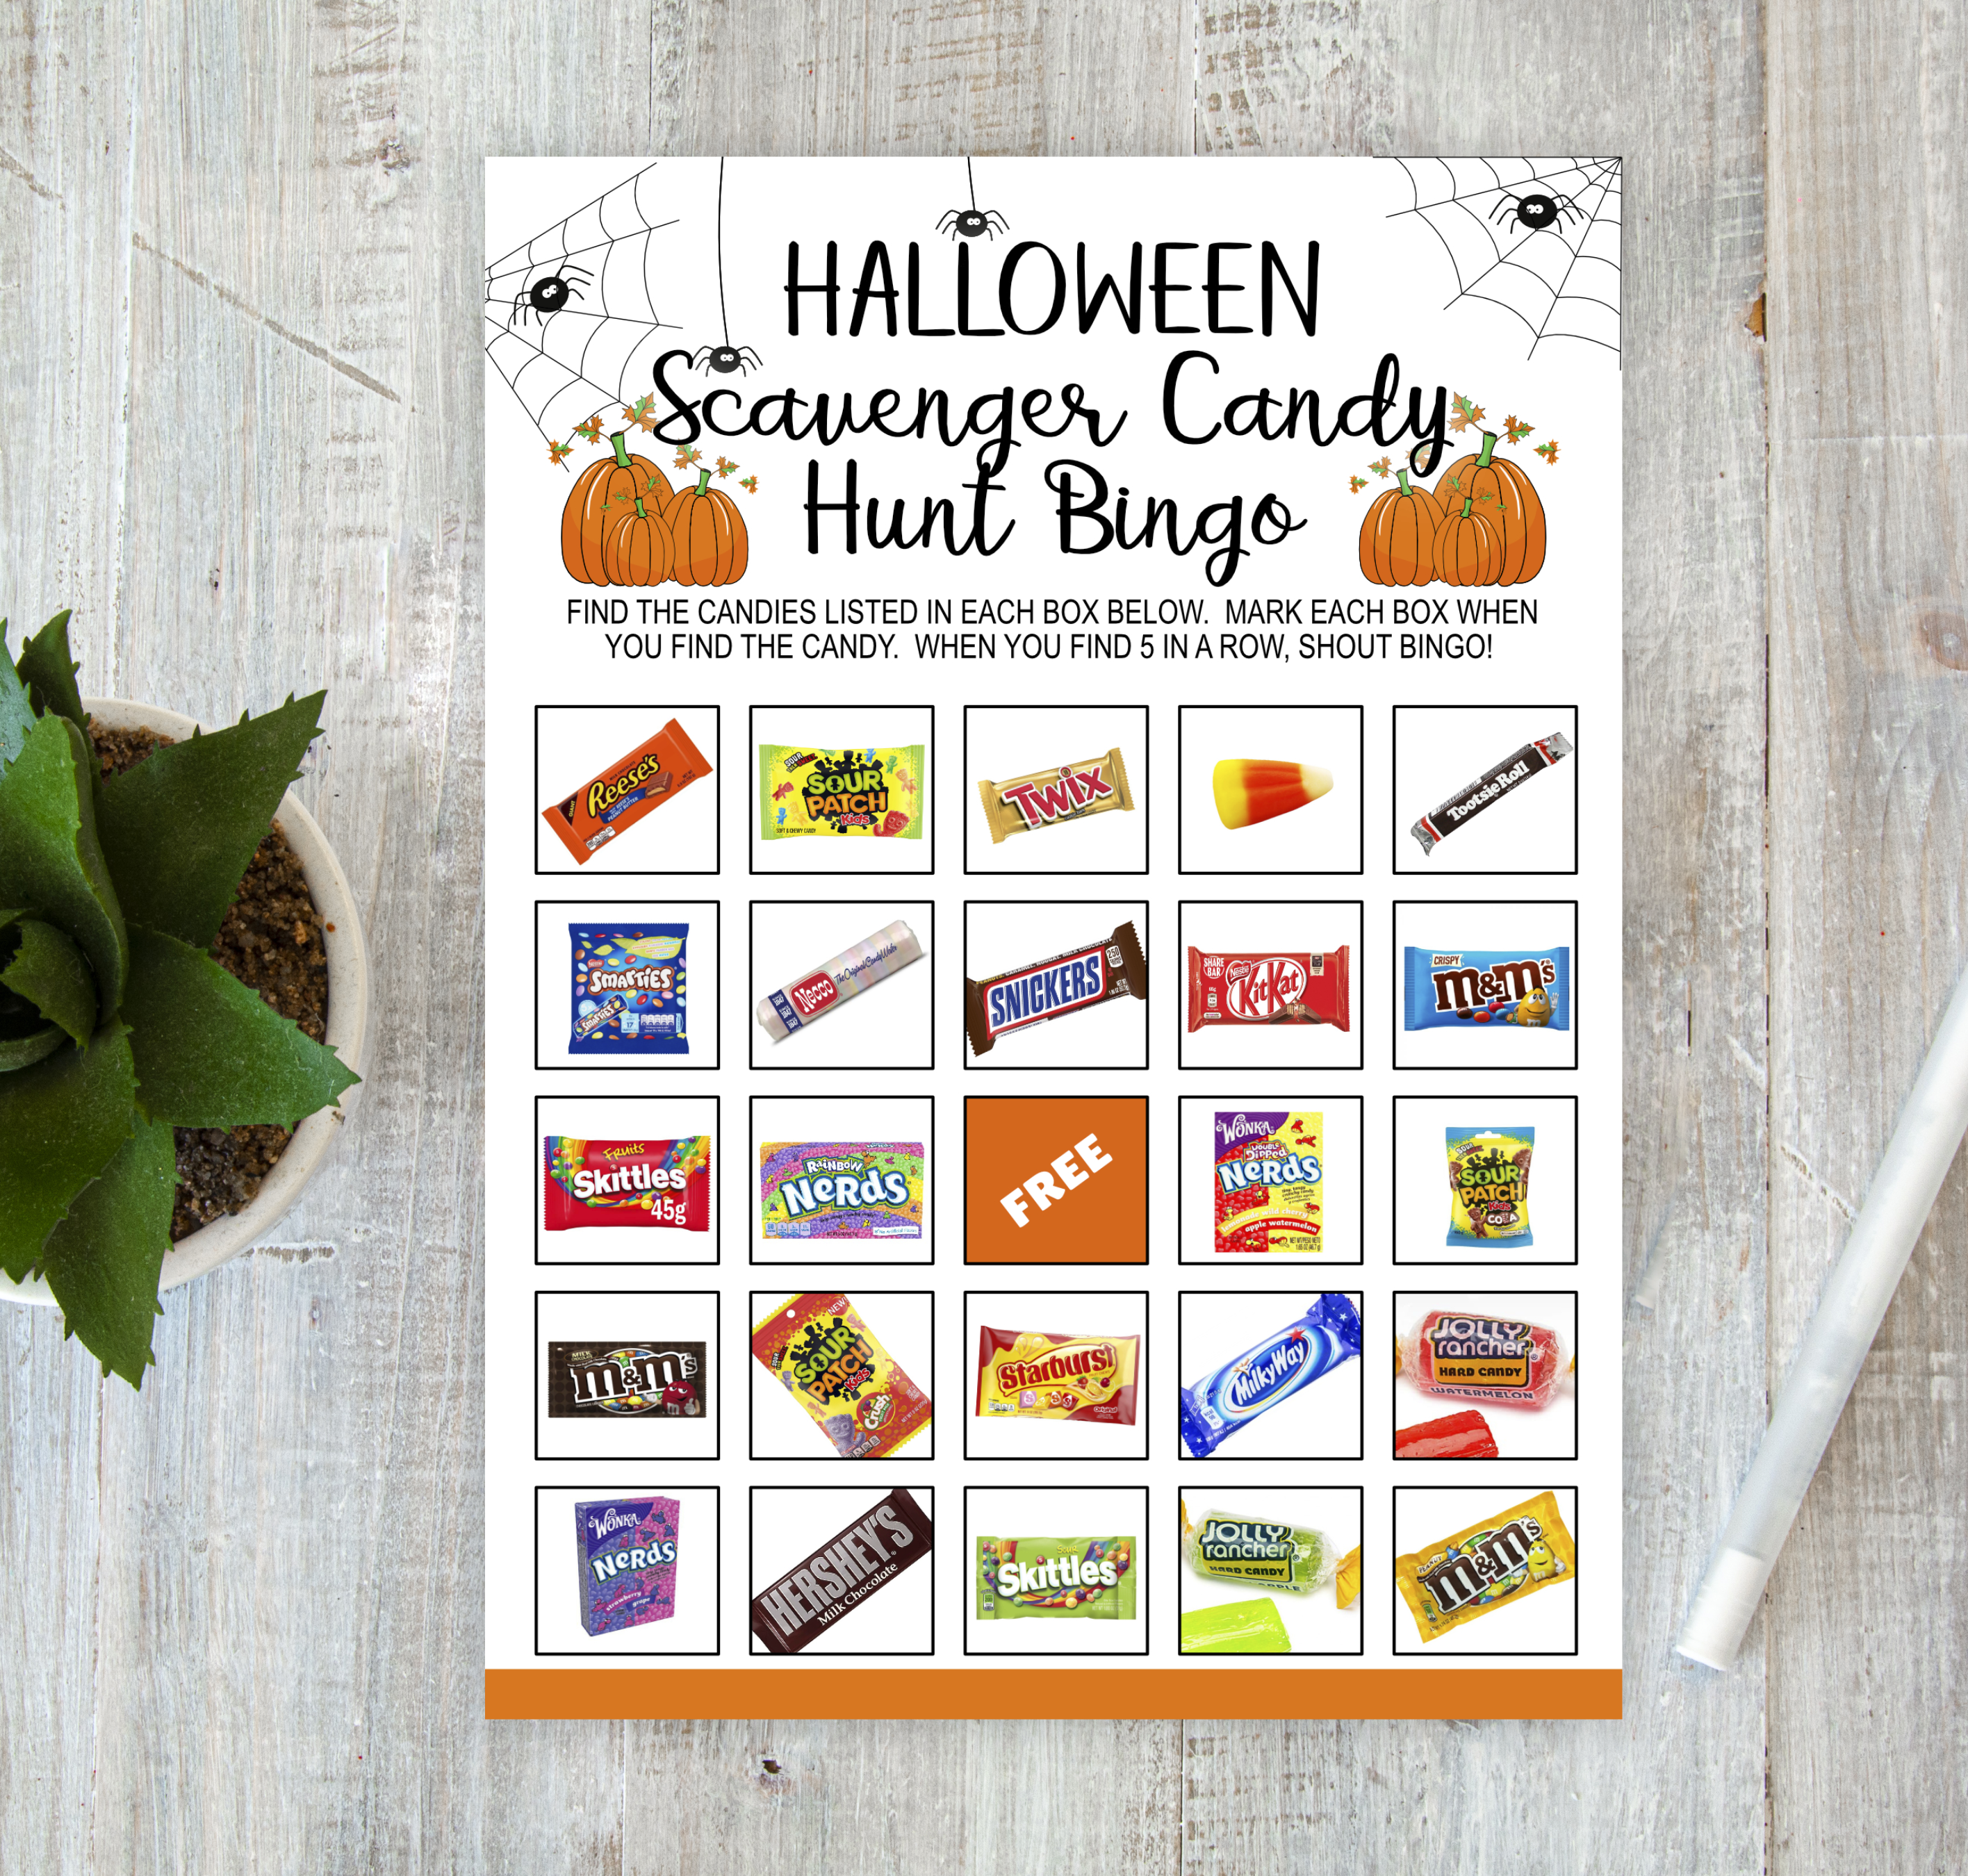 Halloween Halloween Scavenger Candy Hunt Bingo Game – Printable for Kids and Adults Exciting and fun activity for families and friends